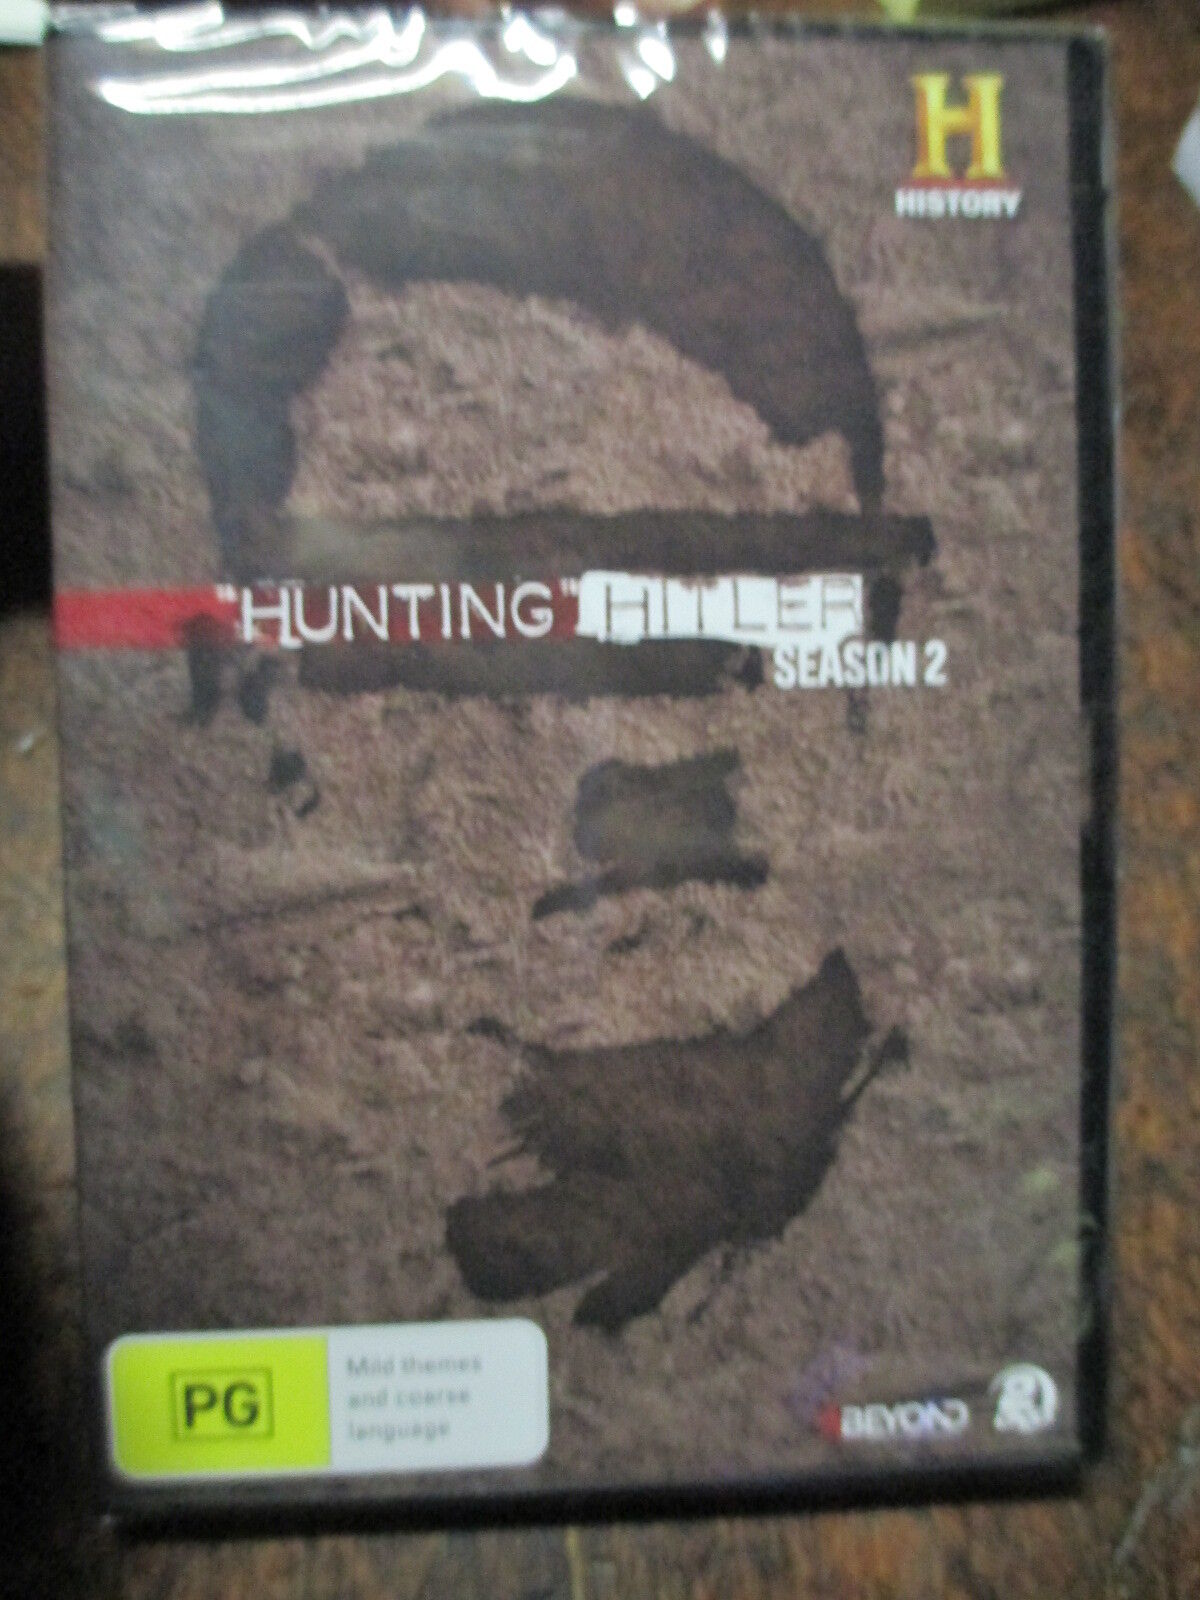 Hunting Hitler Season 2 Docos How Hitler Survived WW2 DVD 5 hrs History Channel